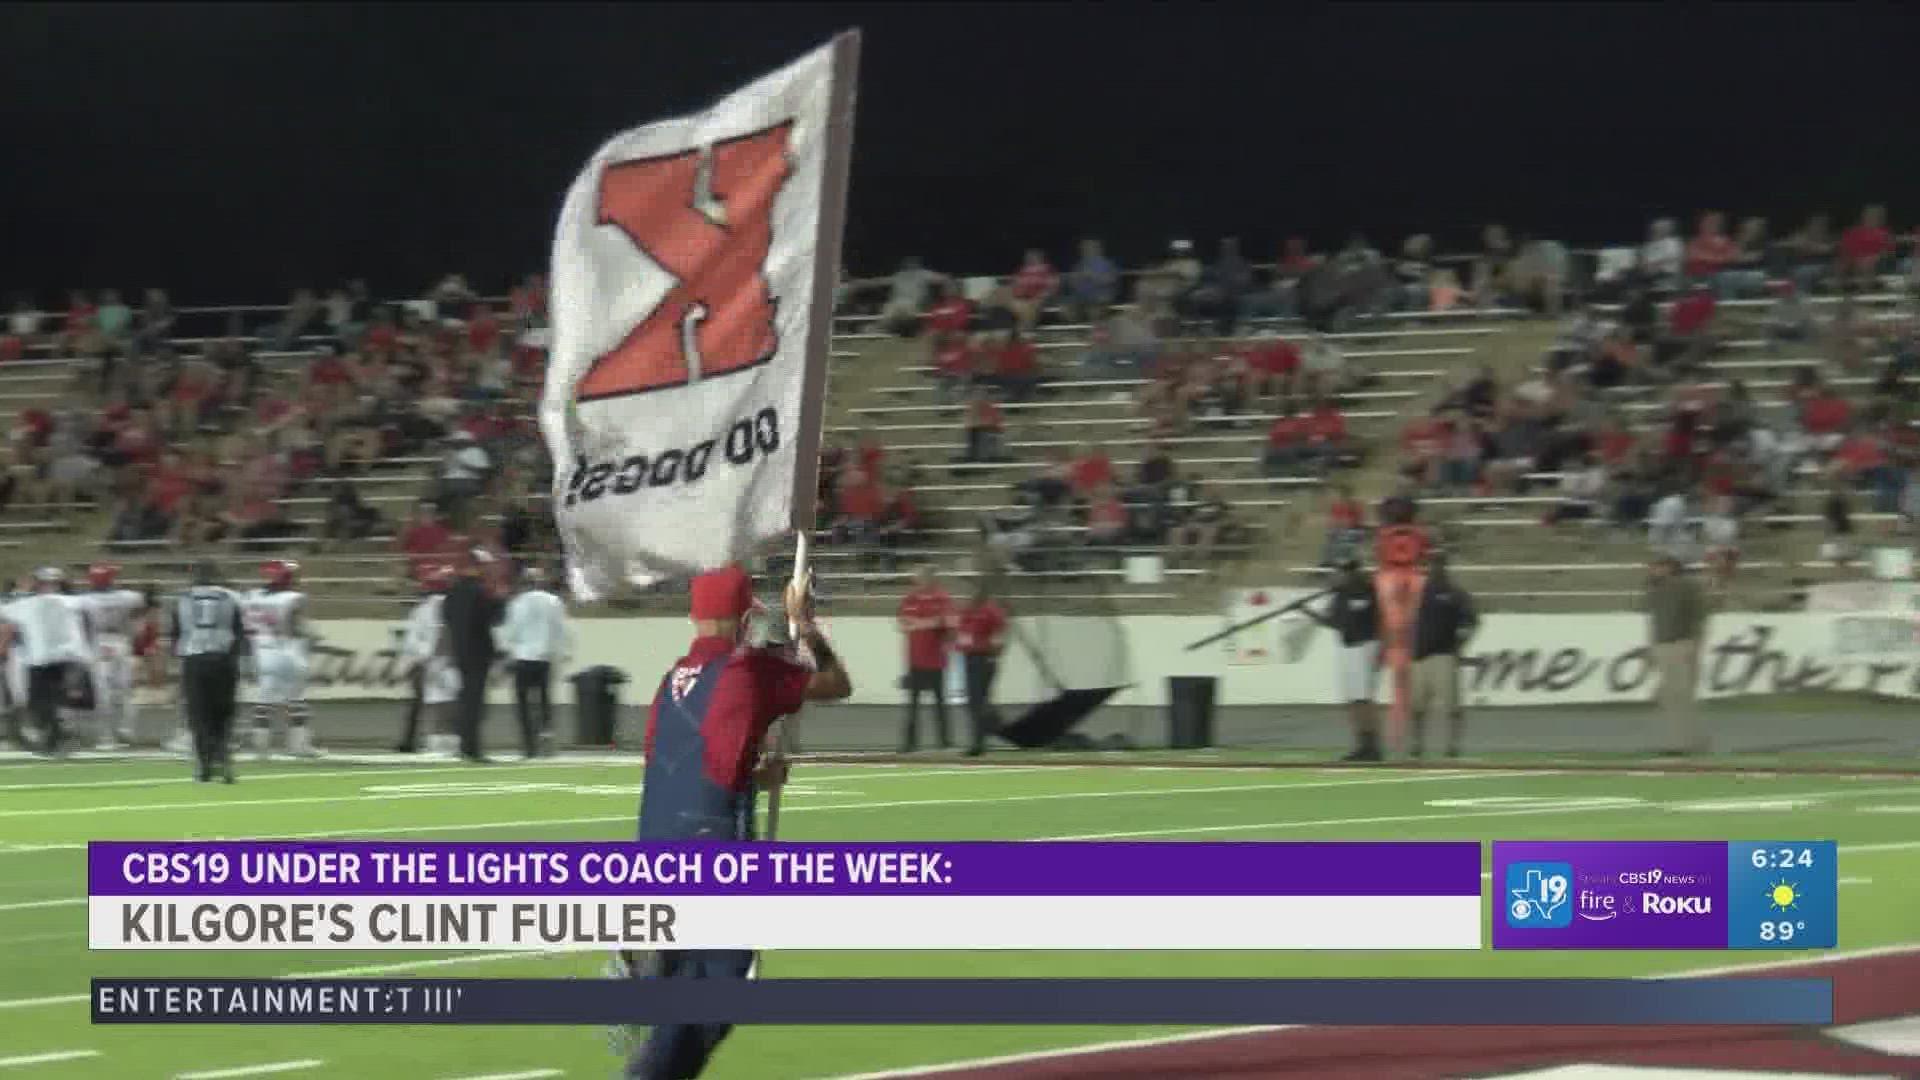 The Kilgore Bulldogs started Division I District 9-4A play in the win column, earning head coach Clint Fuller CBS19 Coach of the Week